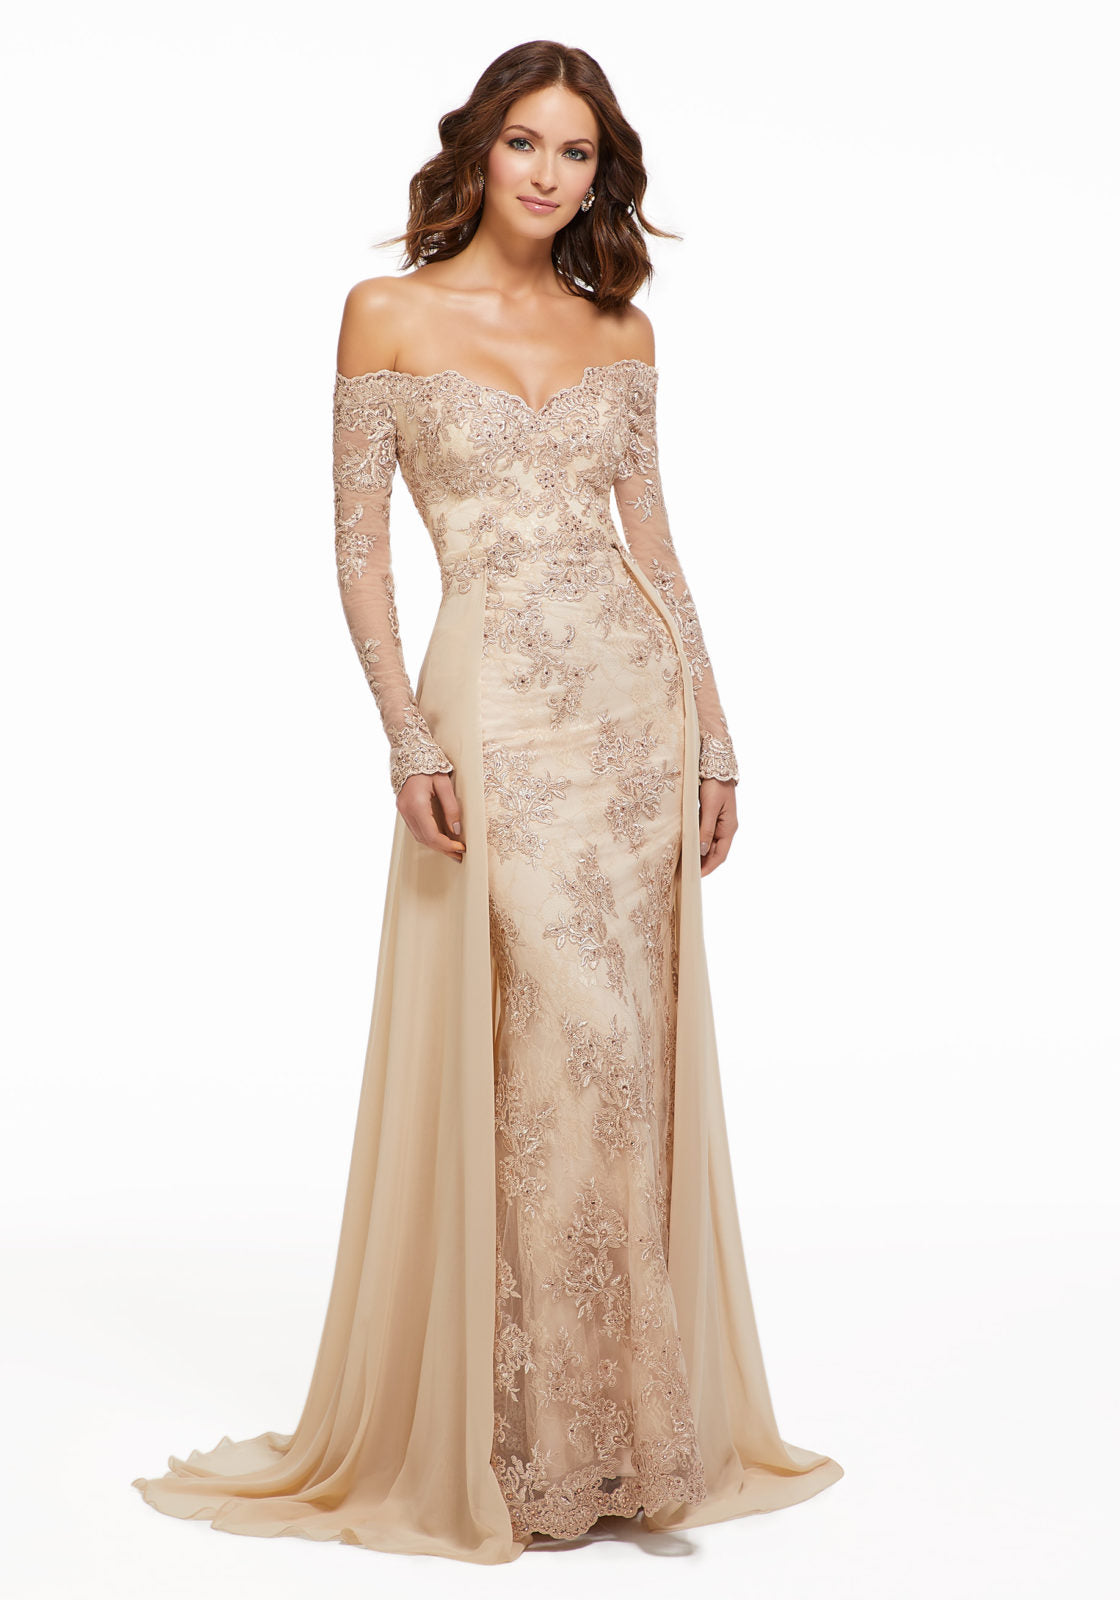 Chantilly Lace Evening Gown With Detachable Train Morilee